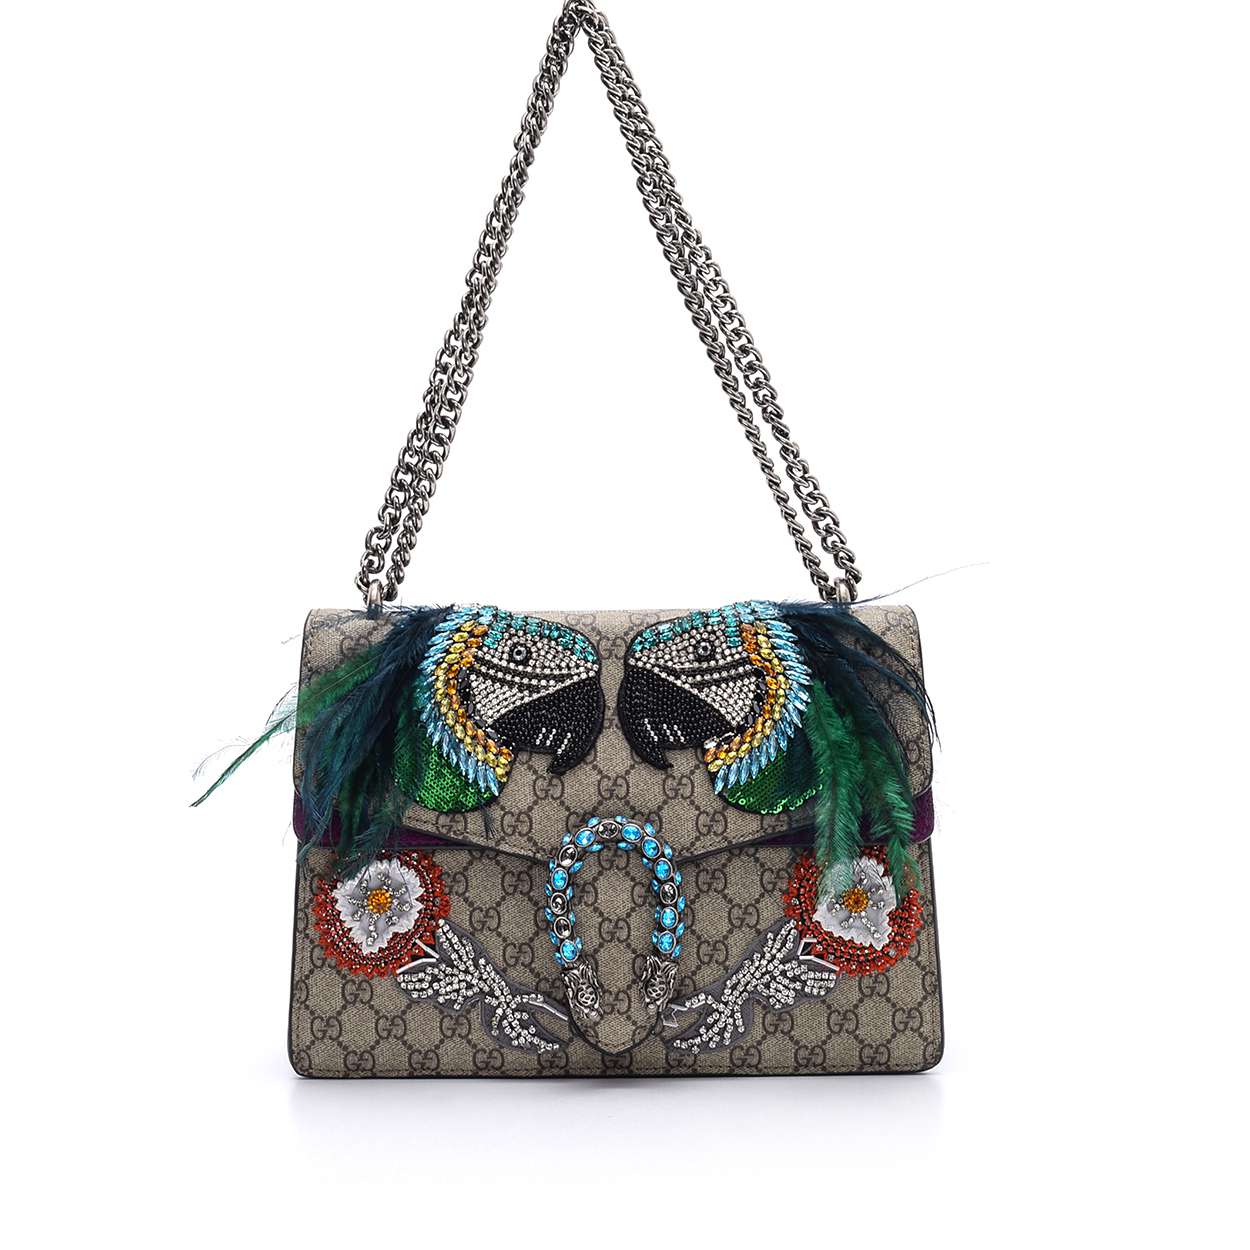 Gucci - Dionysus  Gg Supreme  Parrot Embroidered  Chain Limited Shoulder Bag